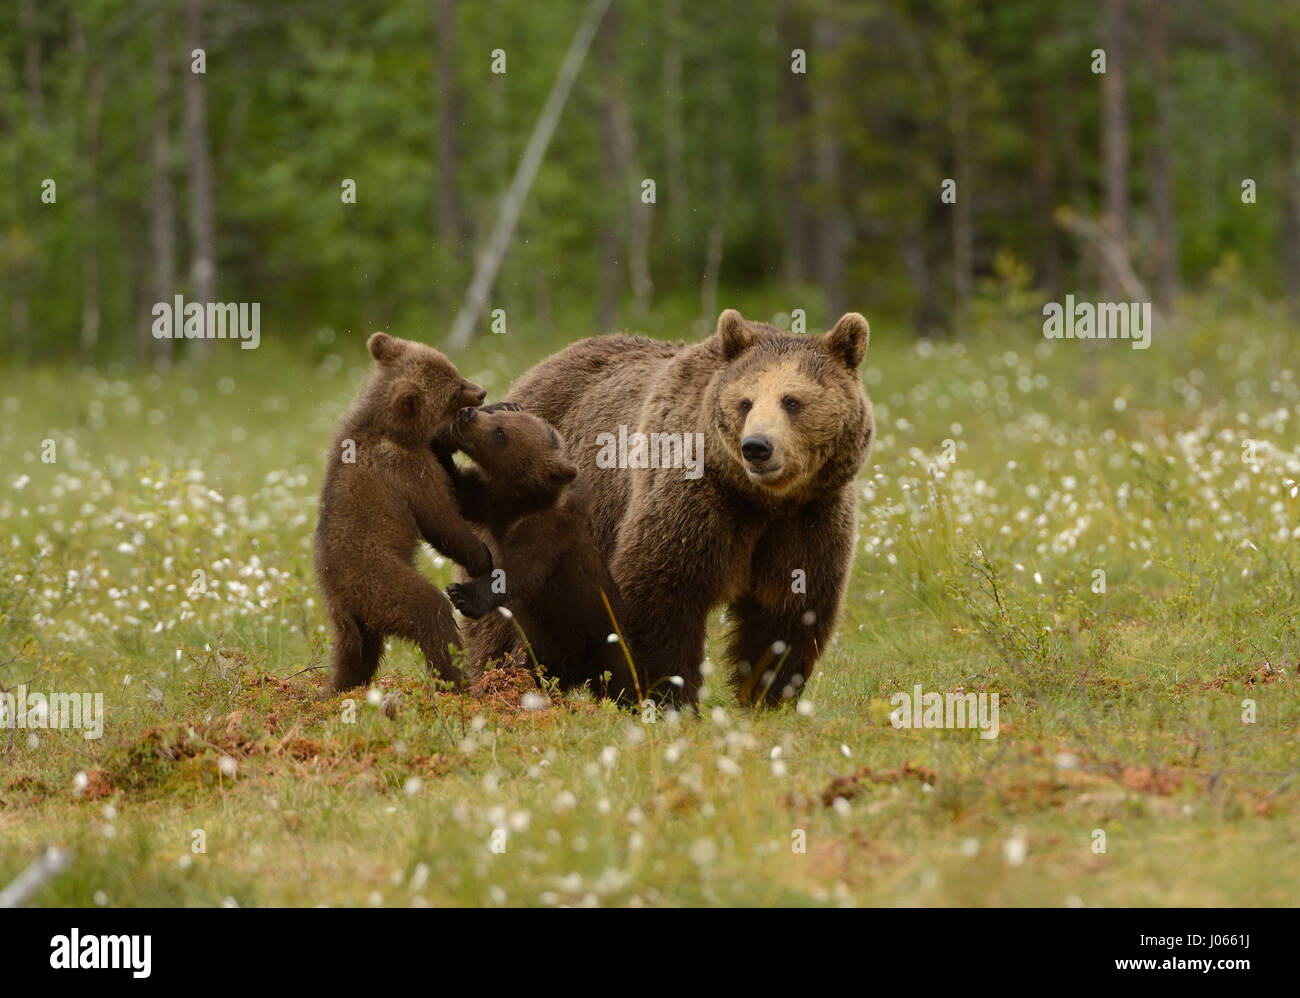 CUTE brown bear cubs have been captured wrestling with each other as their proud mum looks on. The adorable pictures show the bears tumbling and stumbling around as they fight it out. Other snaps show them relaxing following their energetic display after seemingly being told off by their 300-pound mum. Fitness instructor Harry Eggens from The Netherlands travelled to Martinskelkosen, Finland to take the spectacular photos. Harry managed to get within one hundred feet of the bears to catch the action on camera. Stock Photo